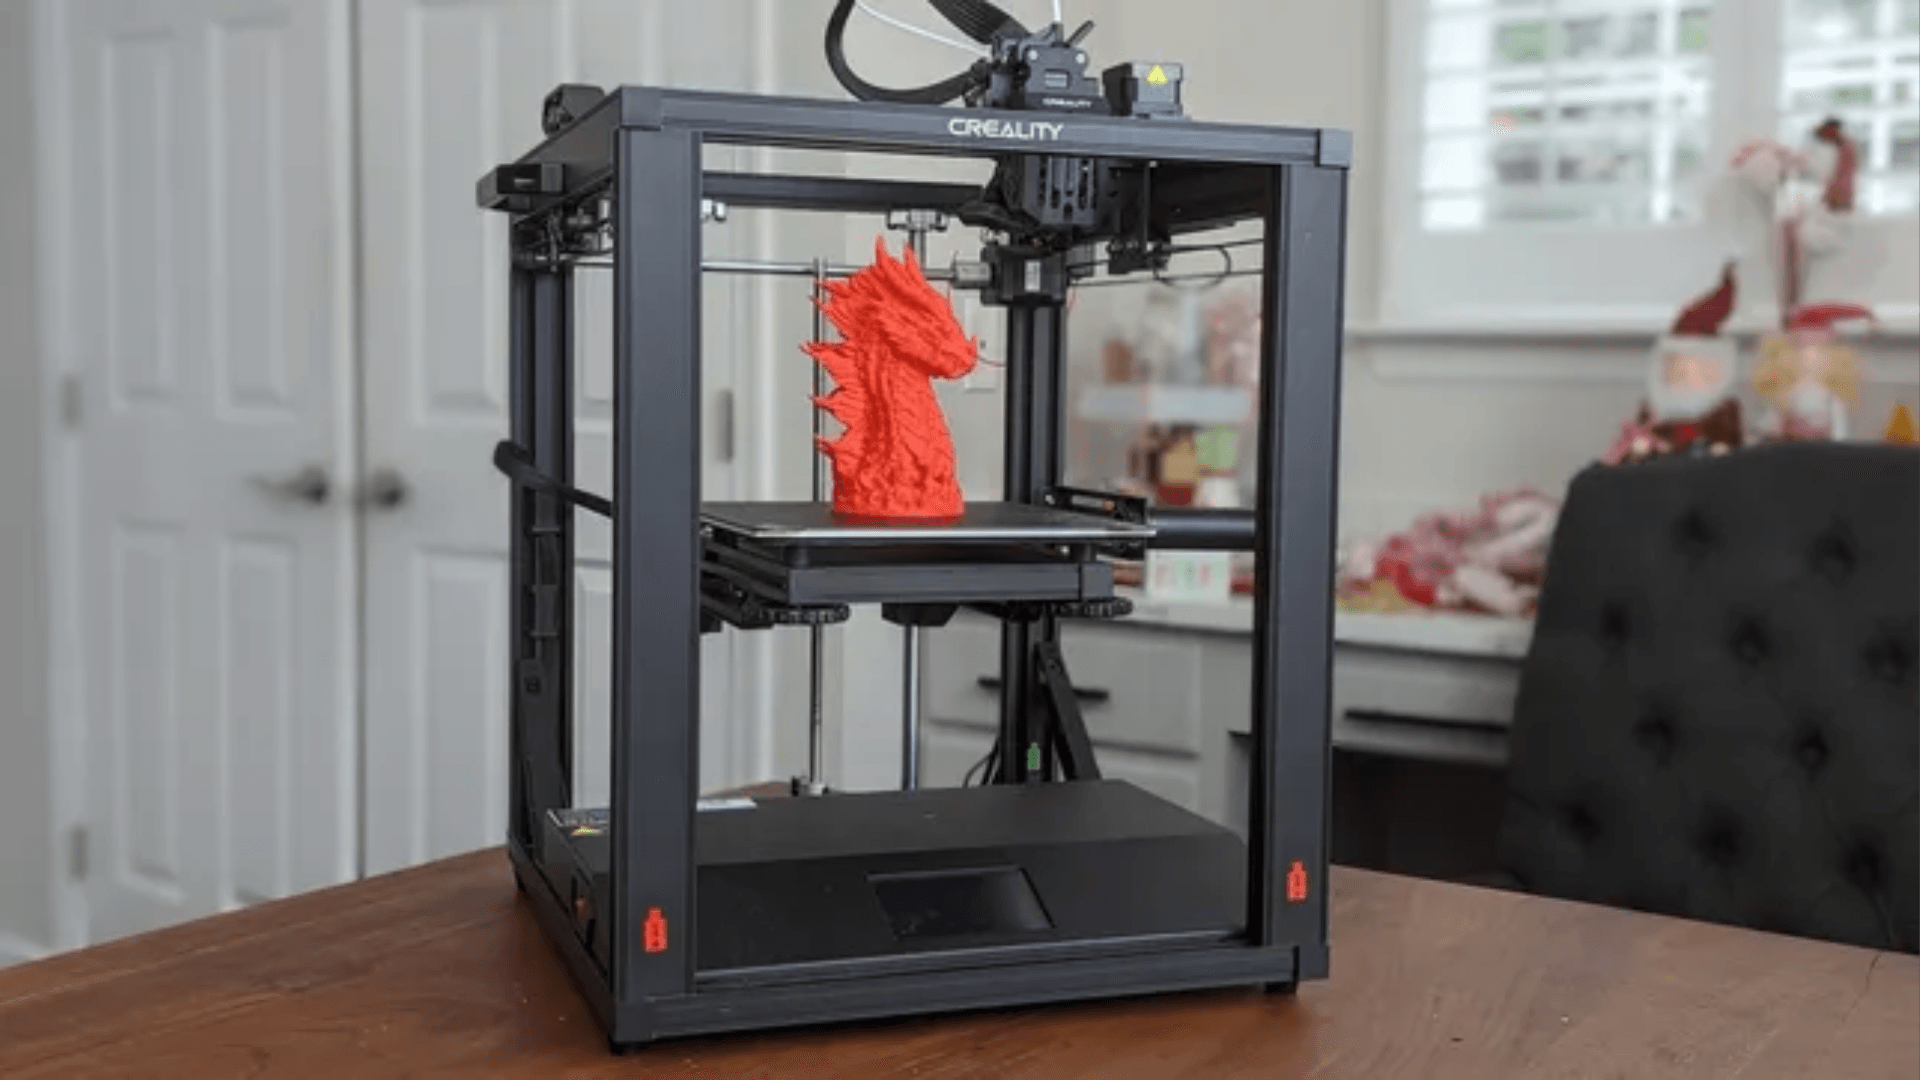 Techabc The New Series By Dinis Guarda Launches With The Review of Creality Ender-5 S1 3D Printer 1.png